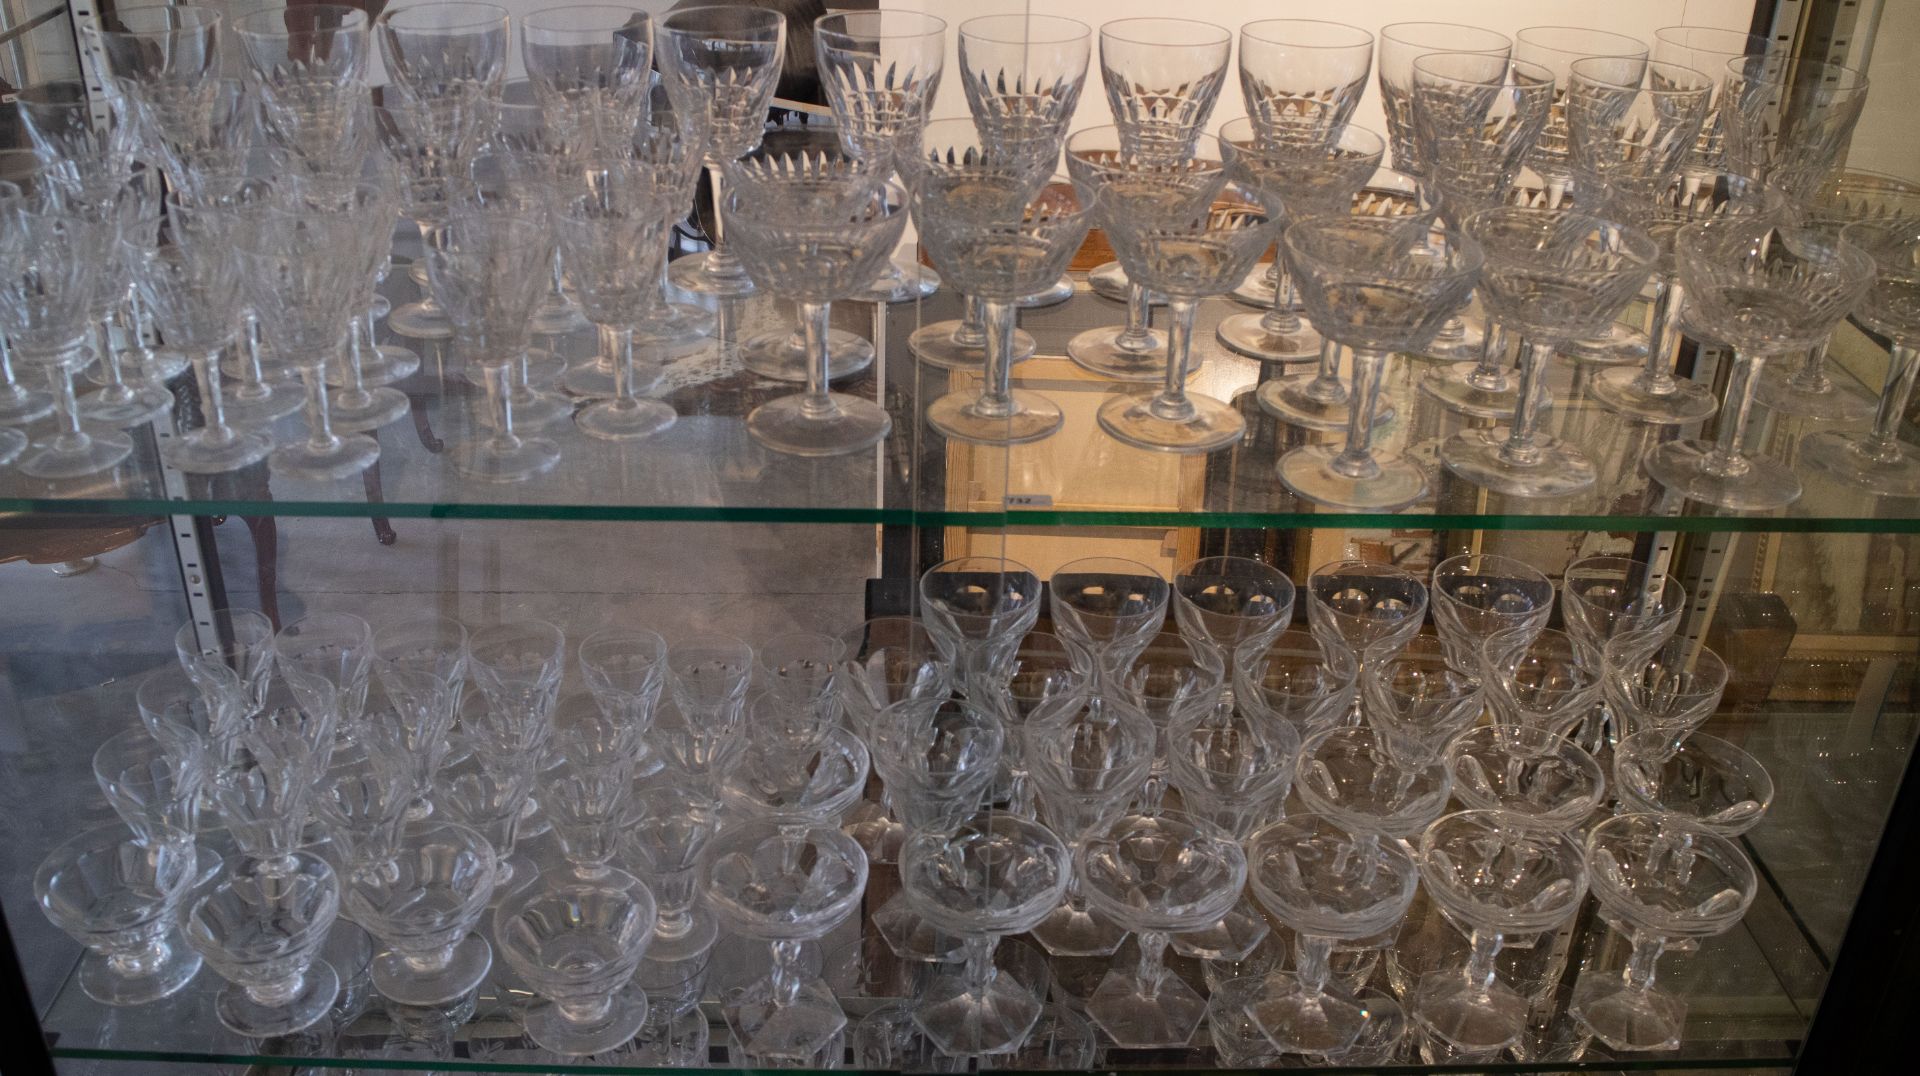 A large collection of Val Saint Lambert crystal glasses